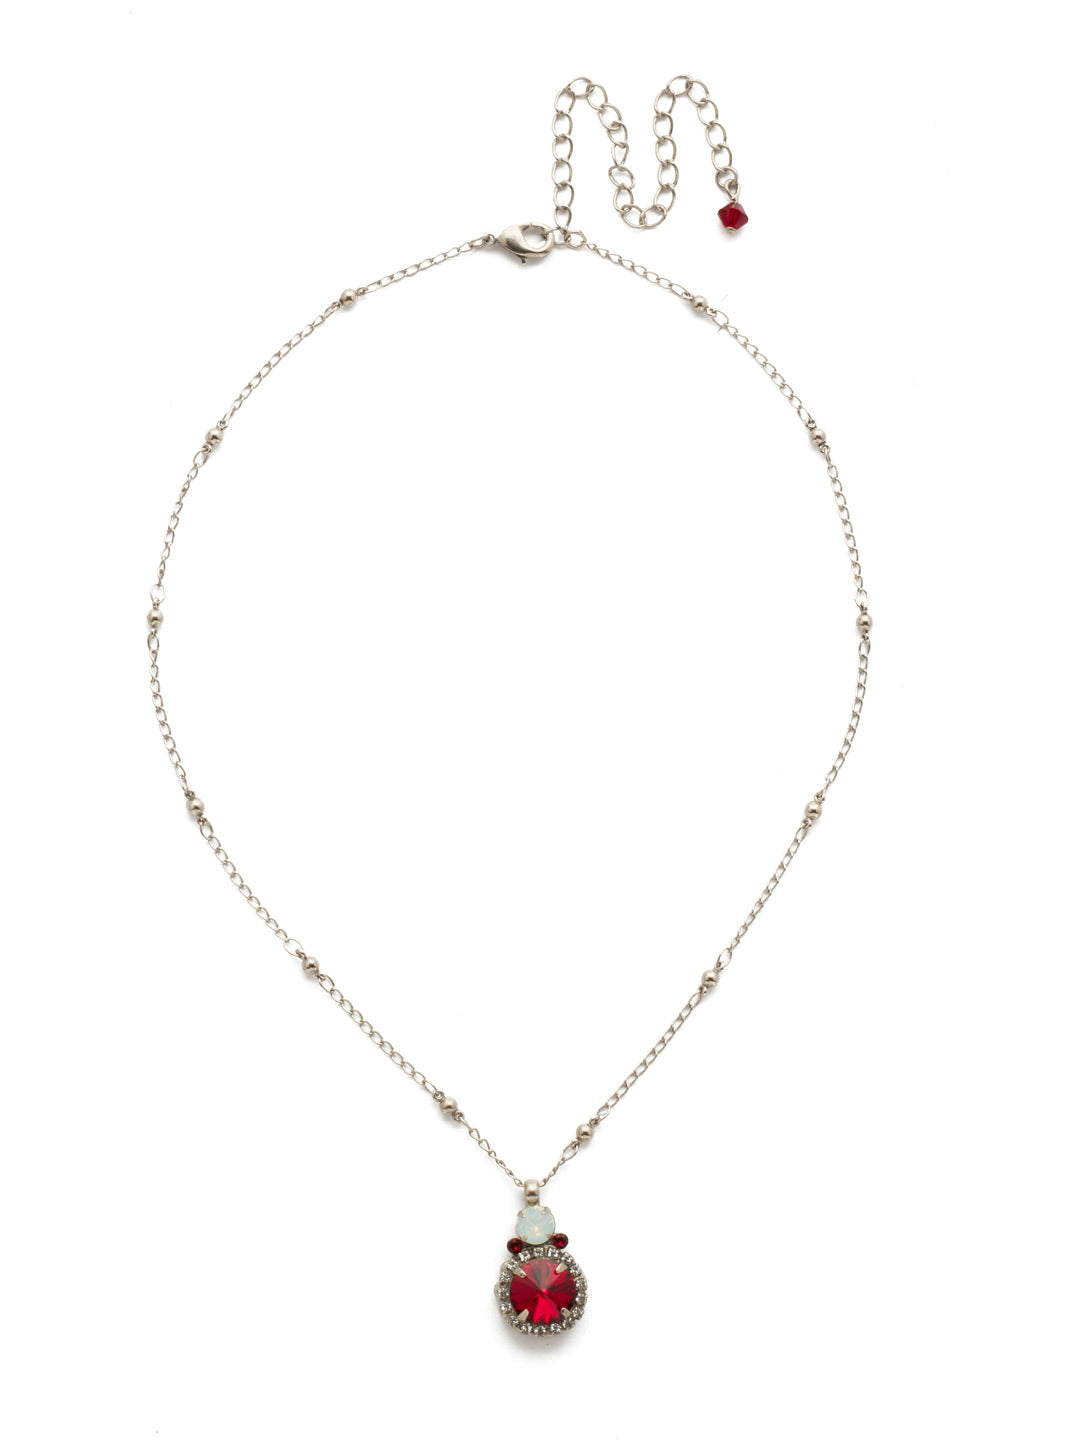 Embellished Rivoli Pendant Necklace - NDU44ASCP - <p>A central round rivoli cut crystal is encircled with delicate rhinestones and embellished with petite circular stones. From Sorrelli's Crimson Pride collection in our Antique Silver-tone finish.</p>